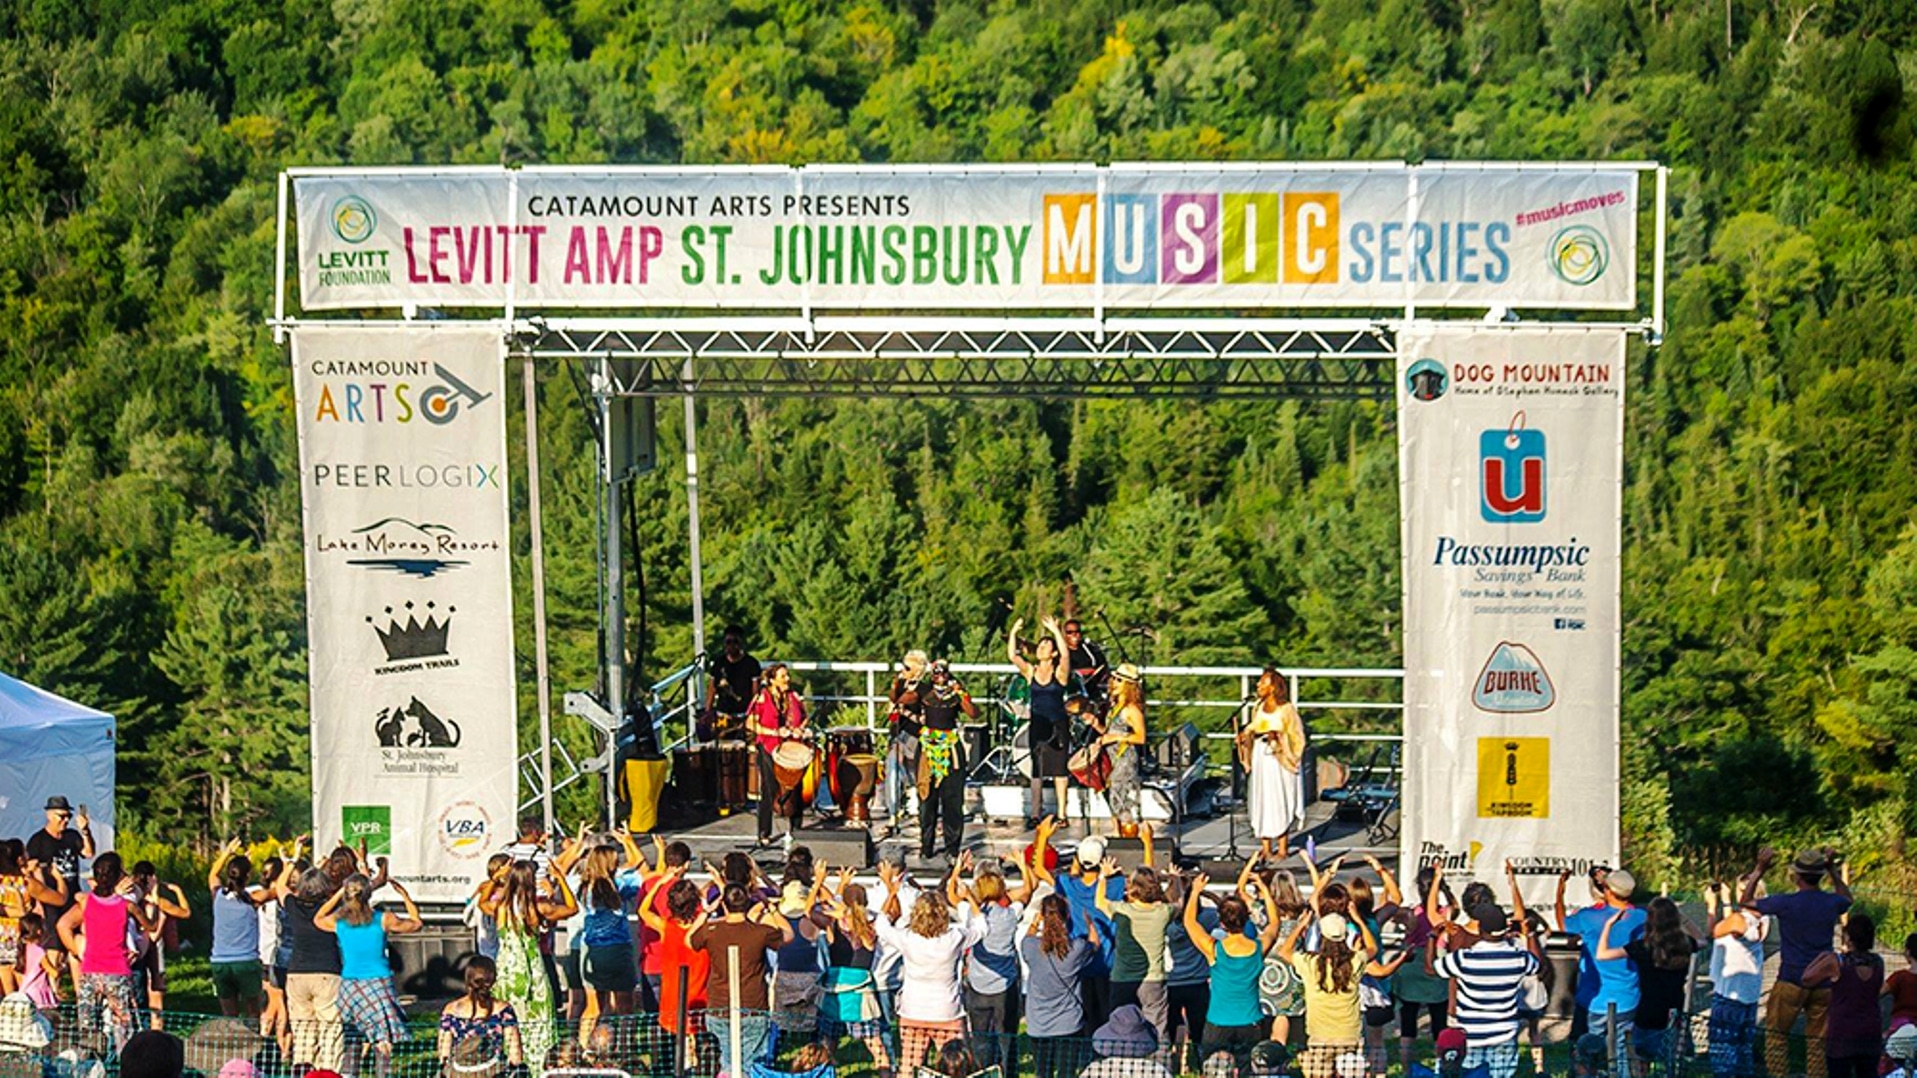 FREE Live Concerts at Dog Mountain in St. Johnsbury Vermont